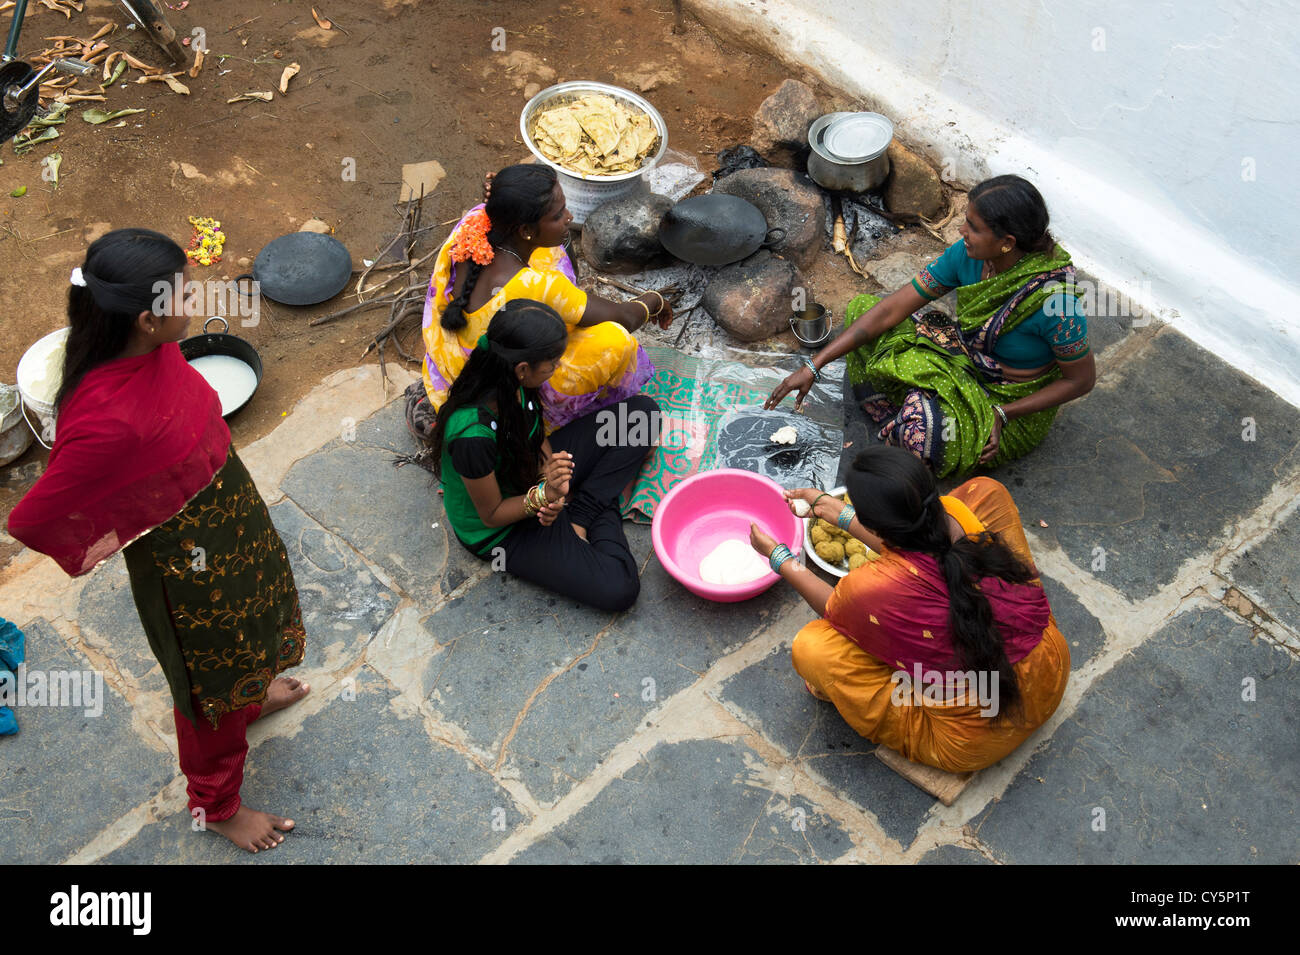 Indian women and girls making sweet jaggery filled chapathi for Dasara festival in a rural Indian village. Andhra Pradesh, India Stock Photo